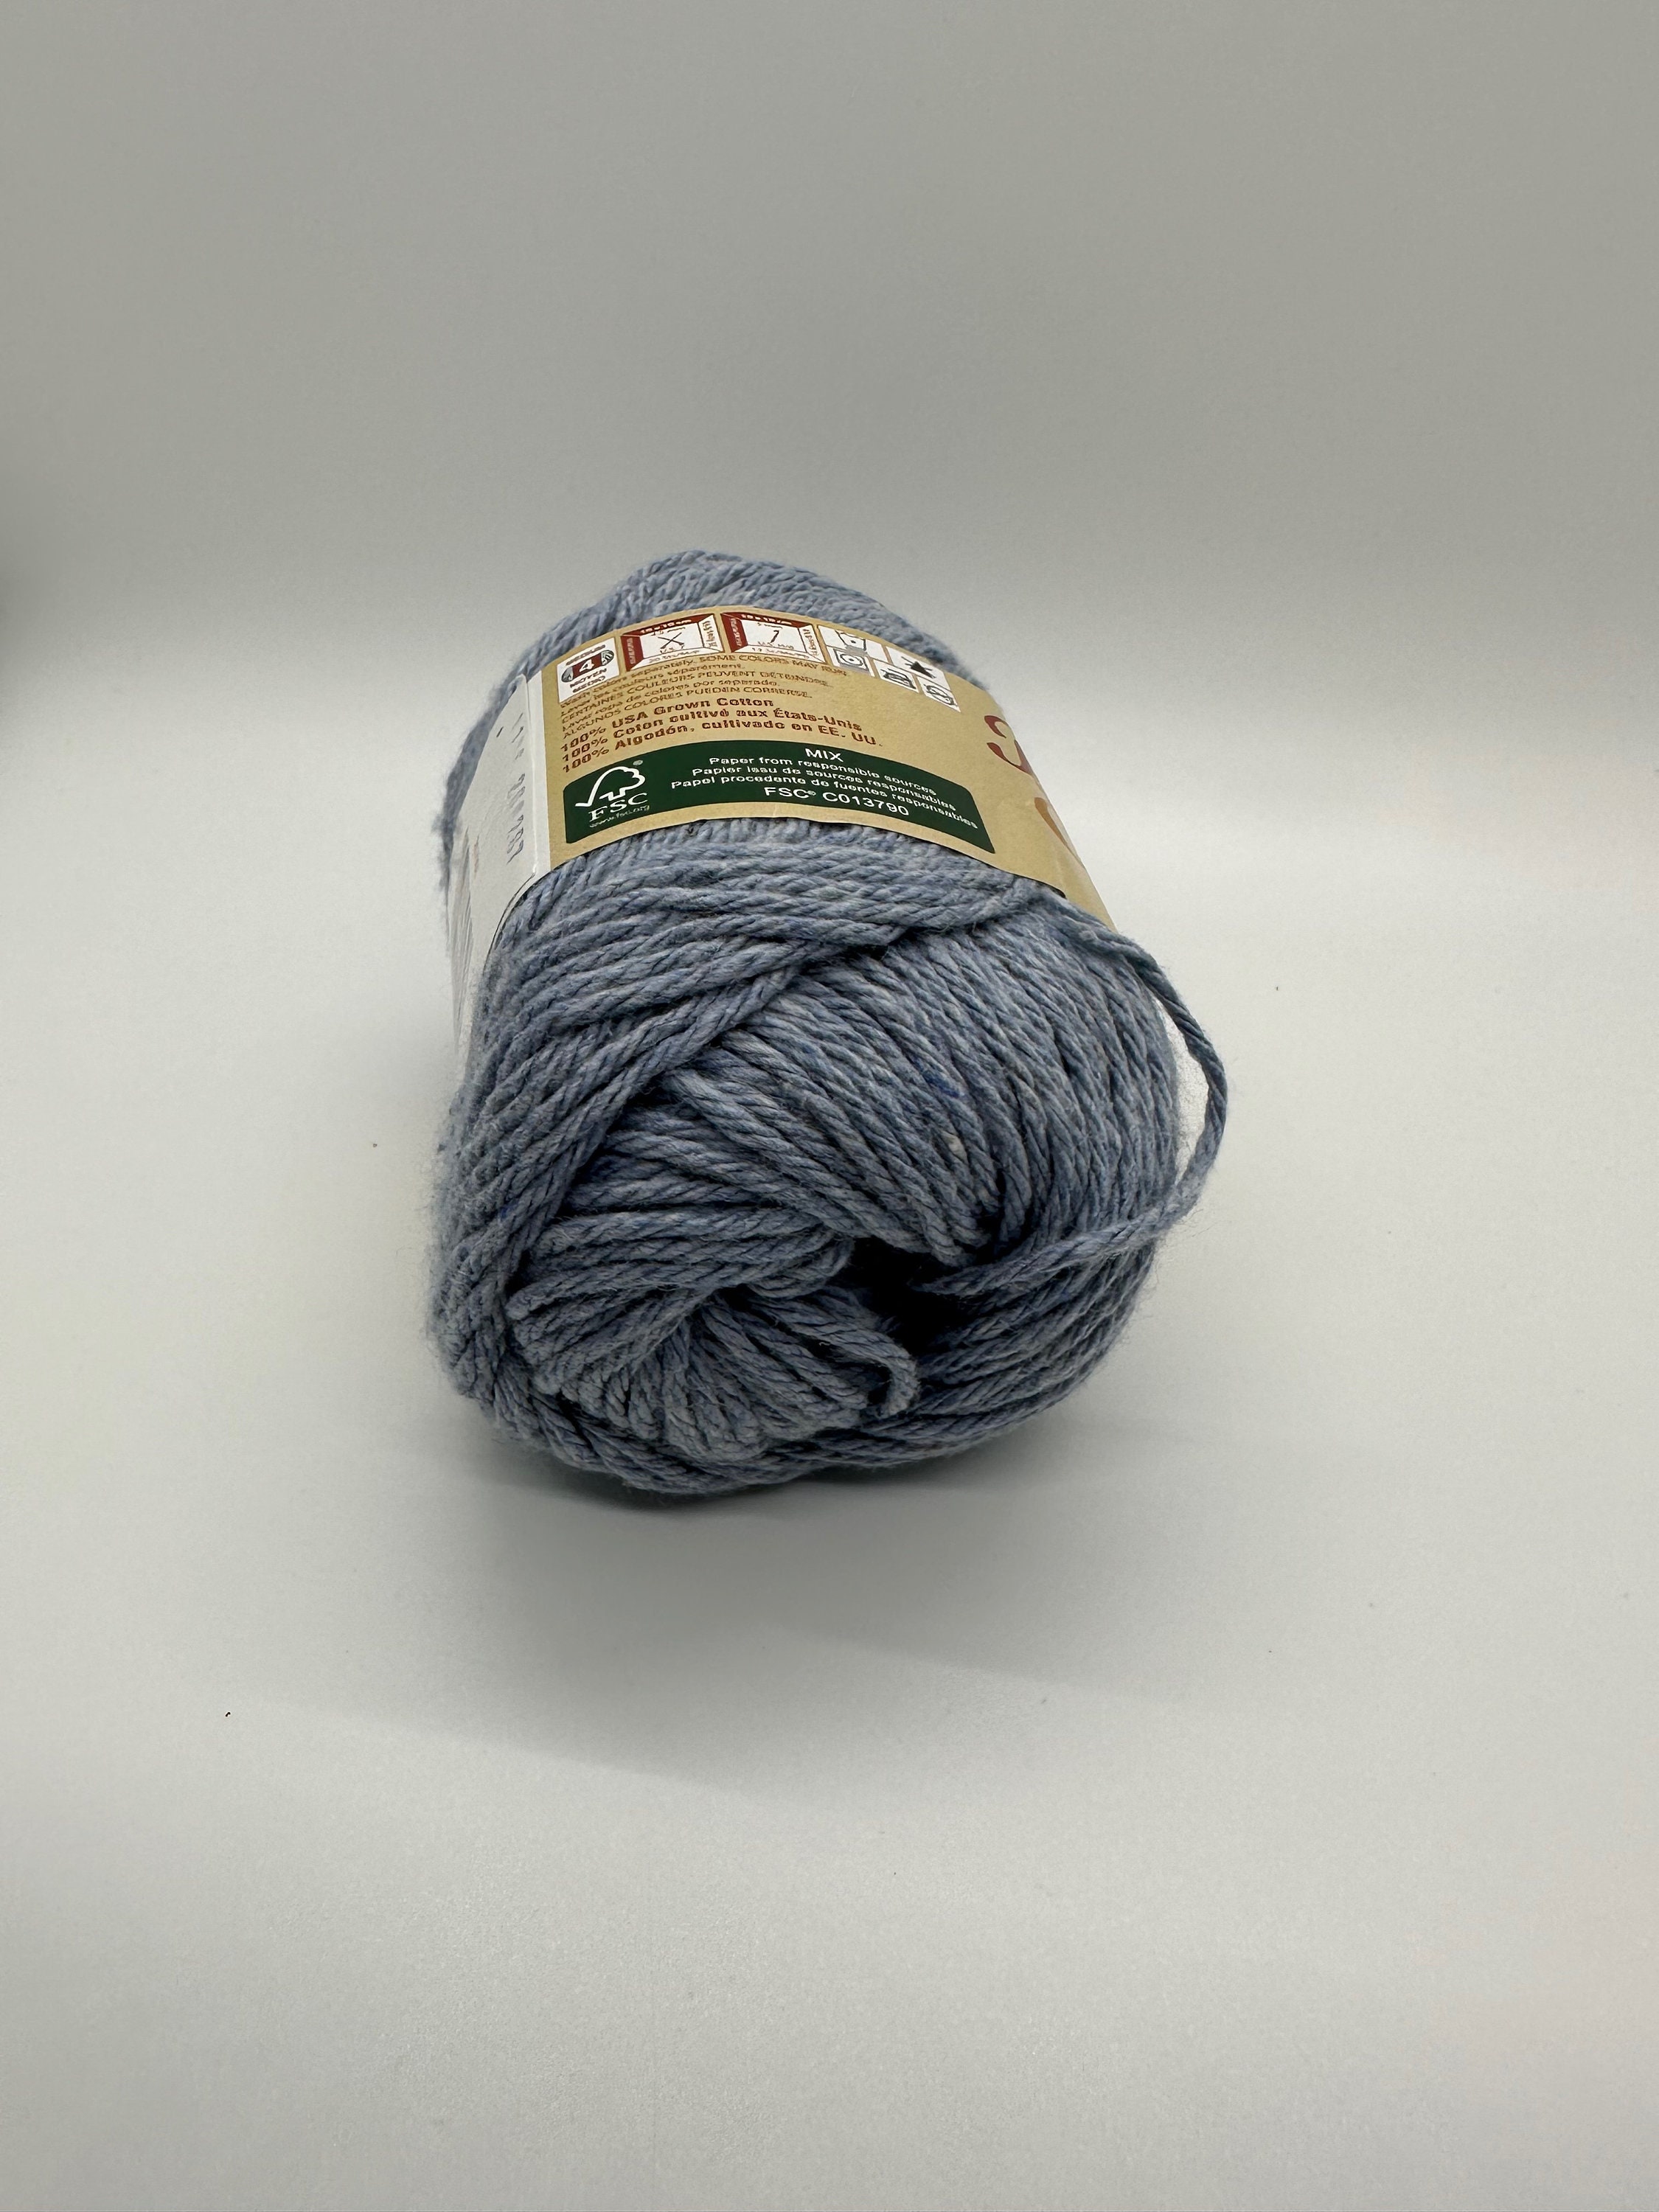 Peaches and Cream Cotton Yarn in Faded Denim Blue Color, Blue Cotton Yarn 